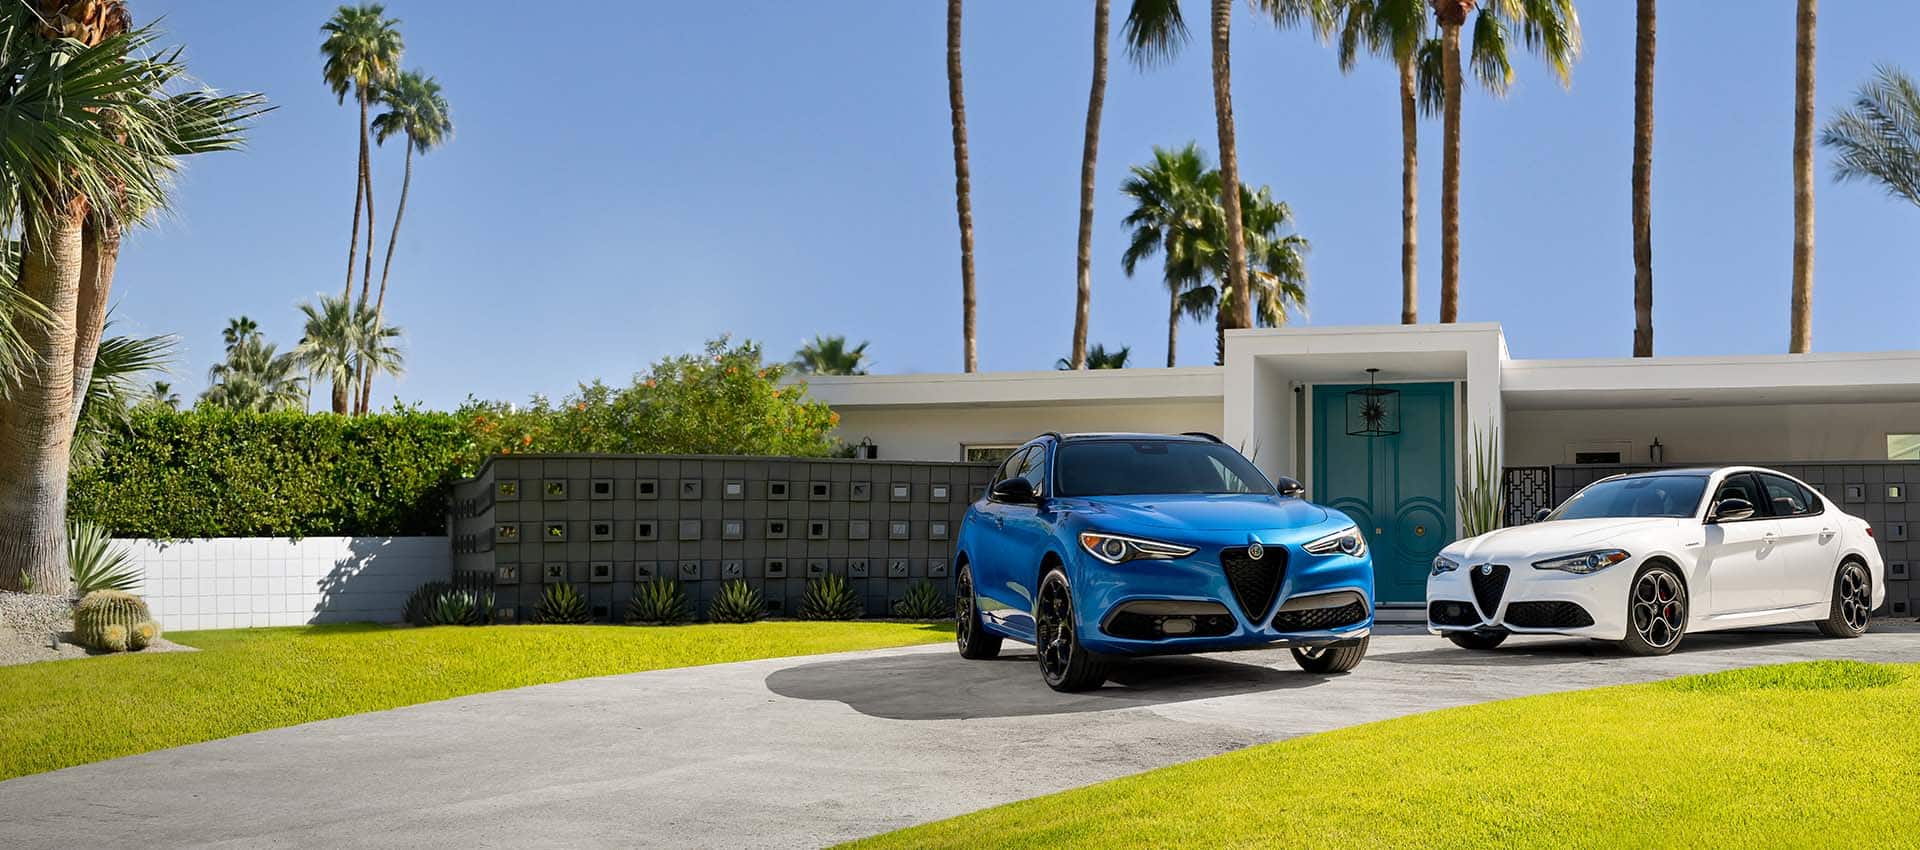 A blue 2022 Alfa Romeo Stelvio TBD and white 2022 Alfa Romeo Giulia TBD parked in the driveway of a contemporary home with palm trees in the background.